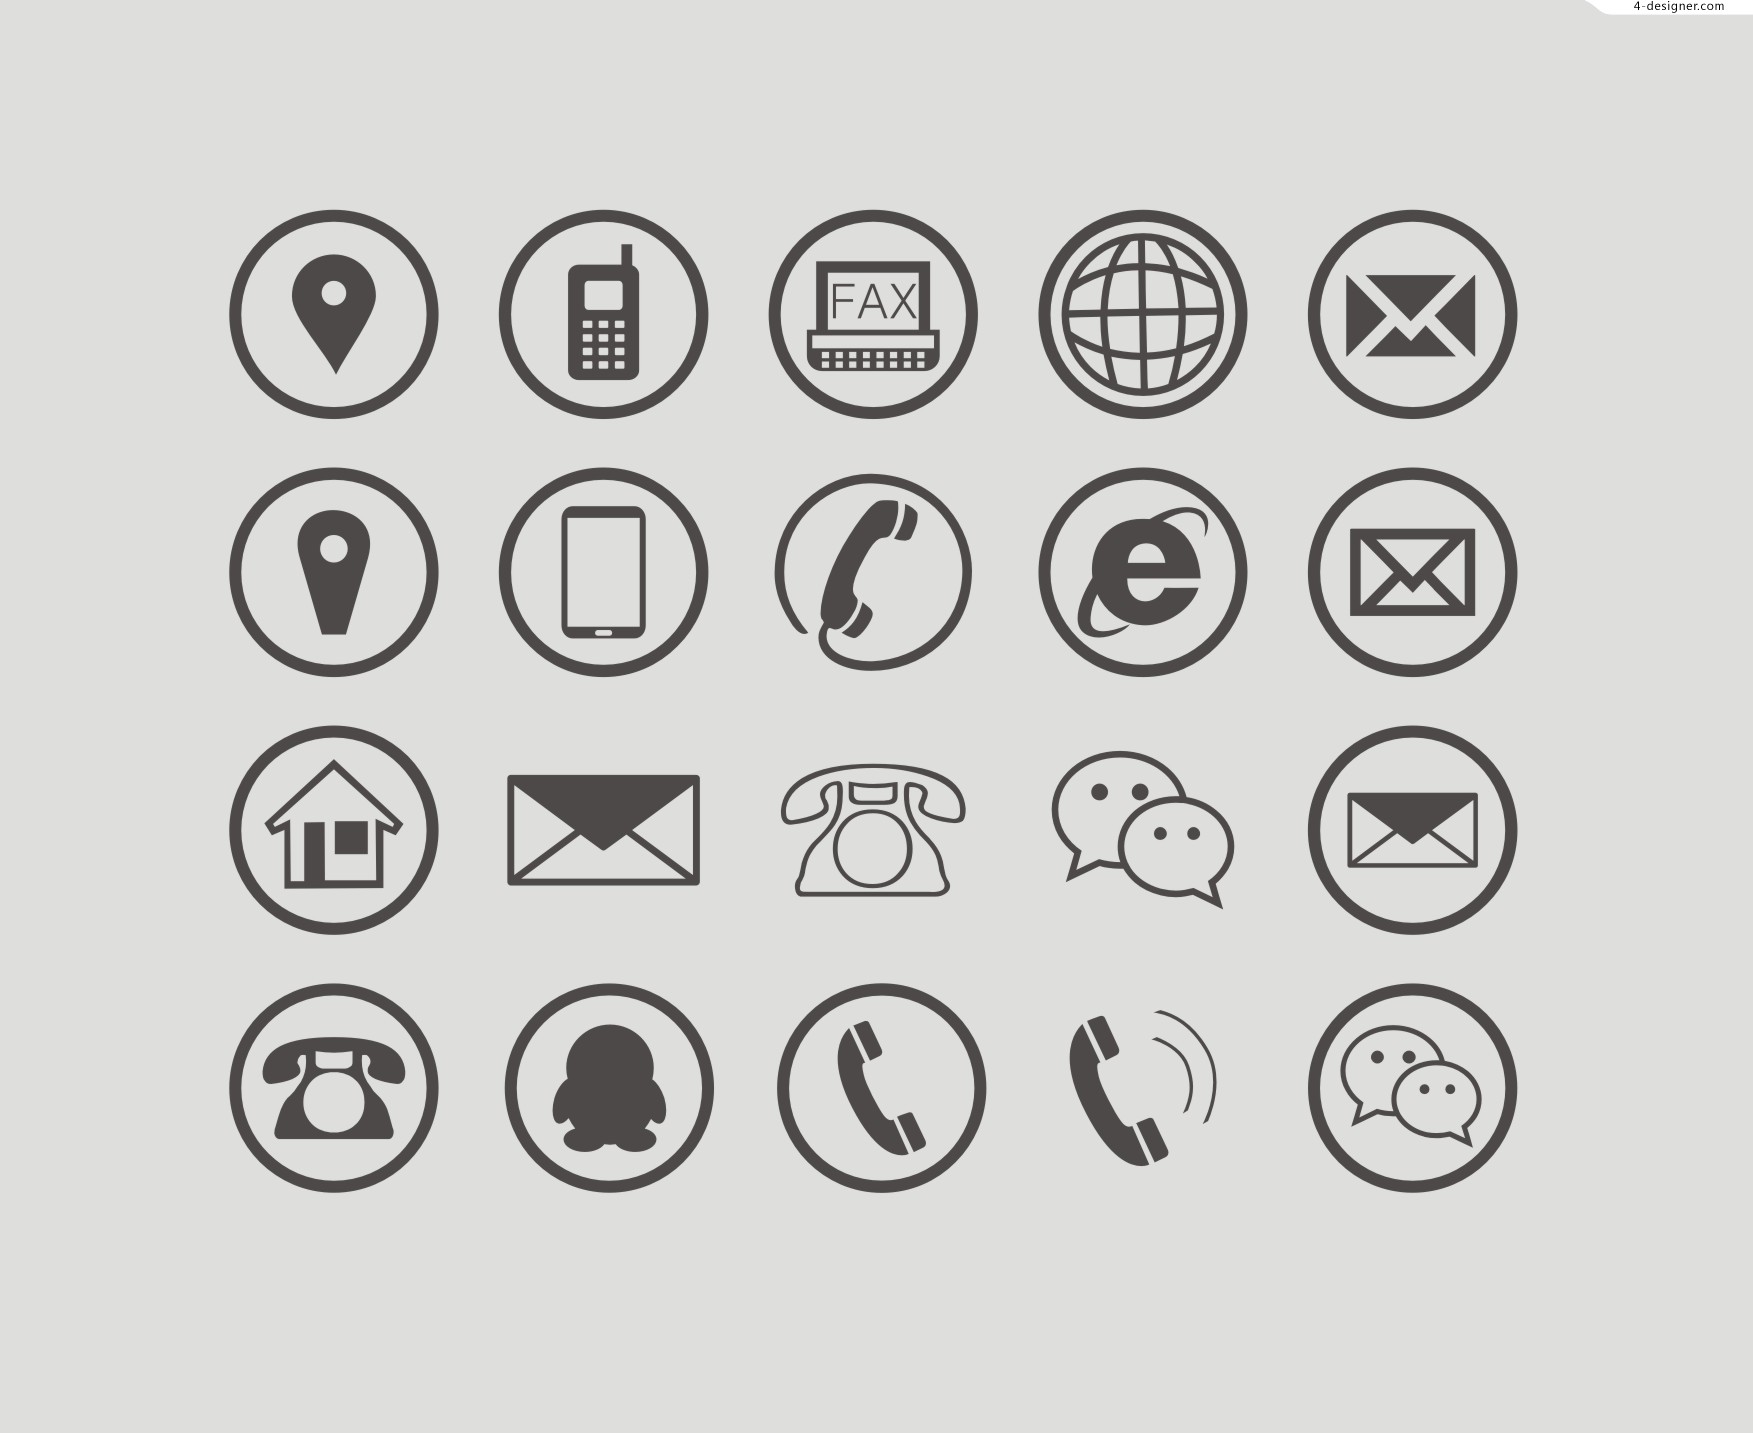 Telephone Email Icon #63012 - Free Icons Library